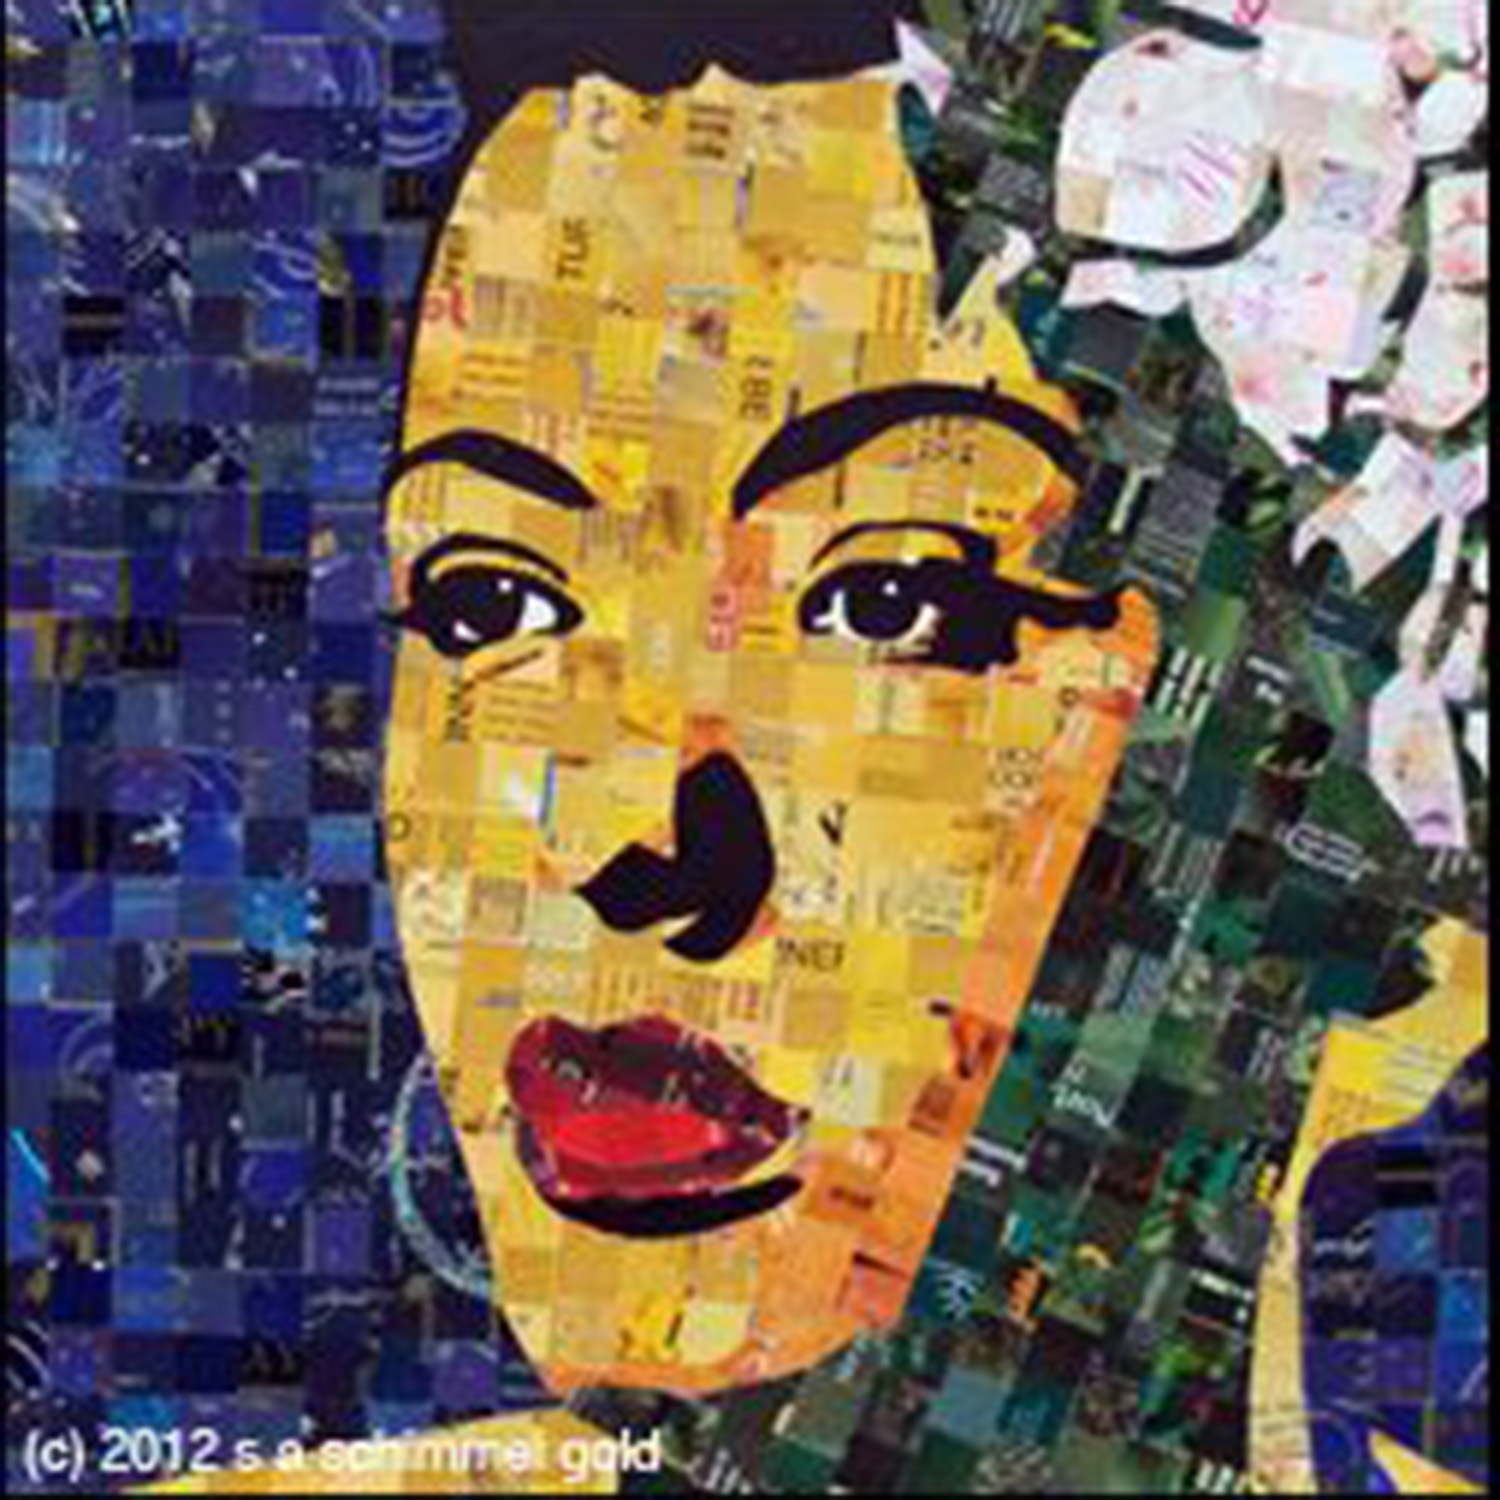 "Lady Day" portrait of Billie Holiday